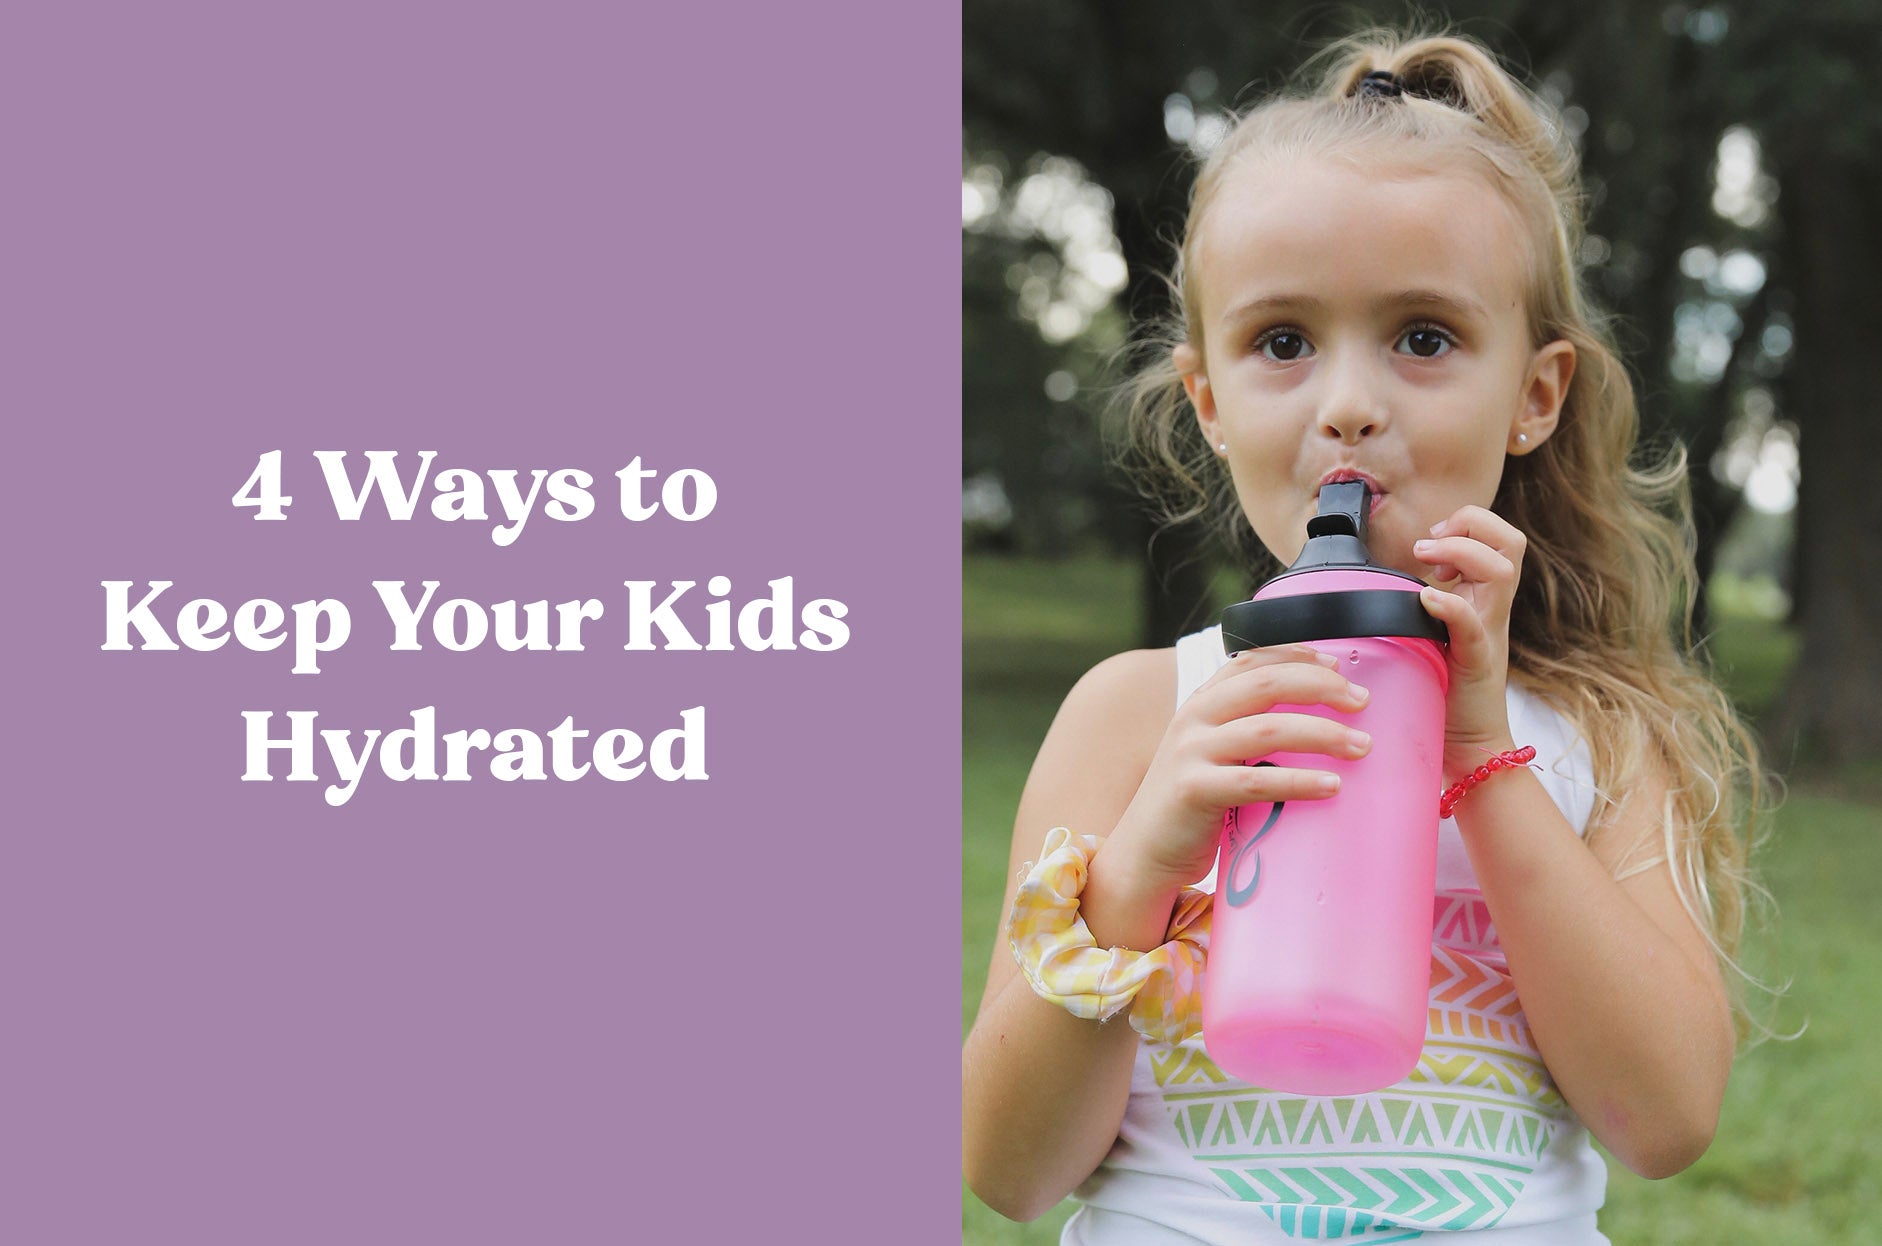 4 Ways to Keep Your Kids Hydrated